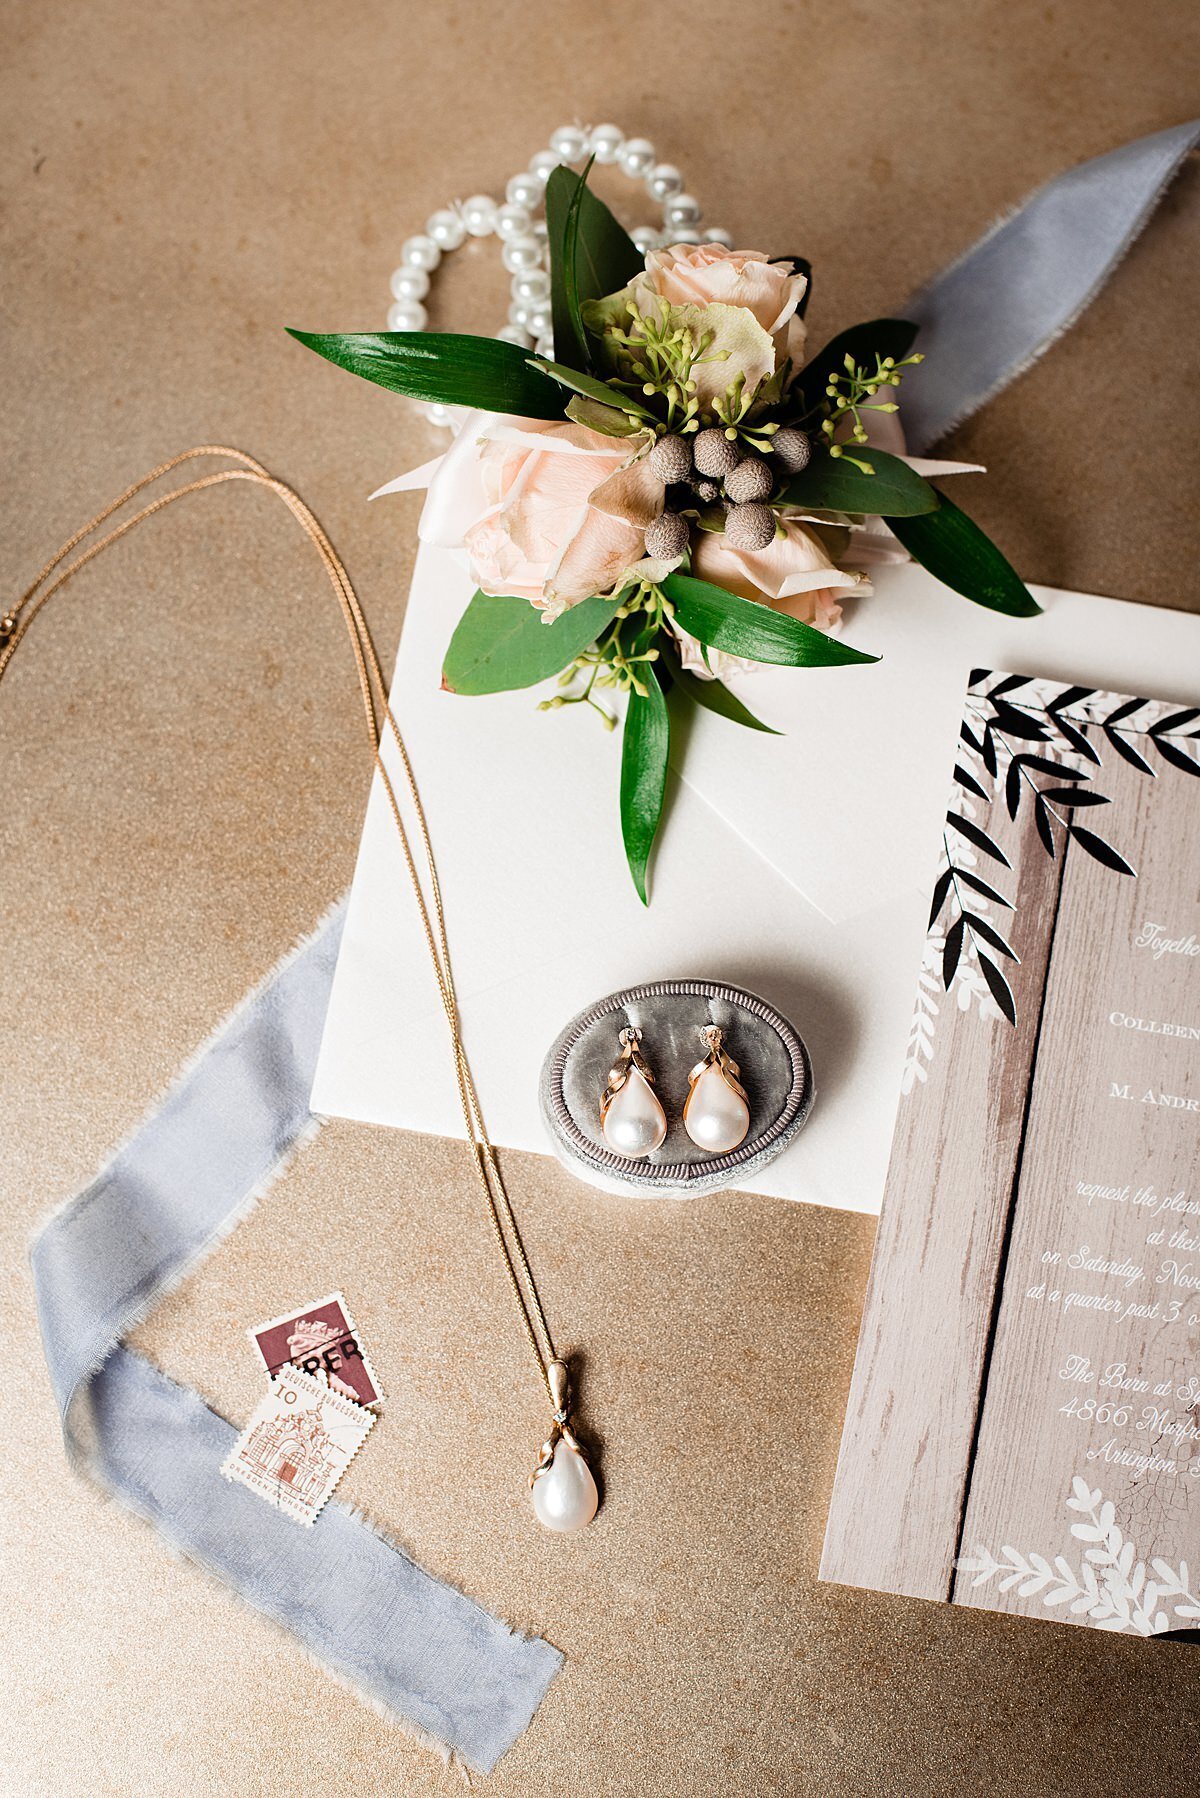 The edge of the wedding invitation and a blue raw silk ribbon with some vintage stamps accent the bride's baroque drop pearl necklace on a gold chain as well as her matching baroque drop pearl earrings set in gold next to her wedding garter and a peach dahlia flower